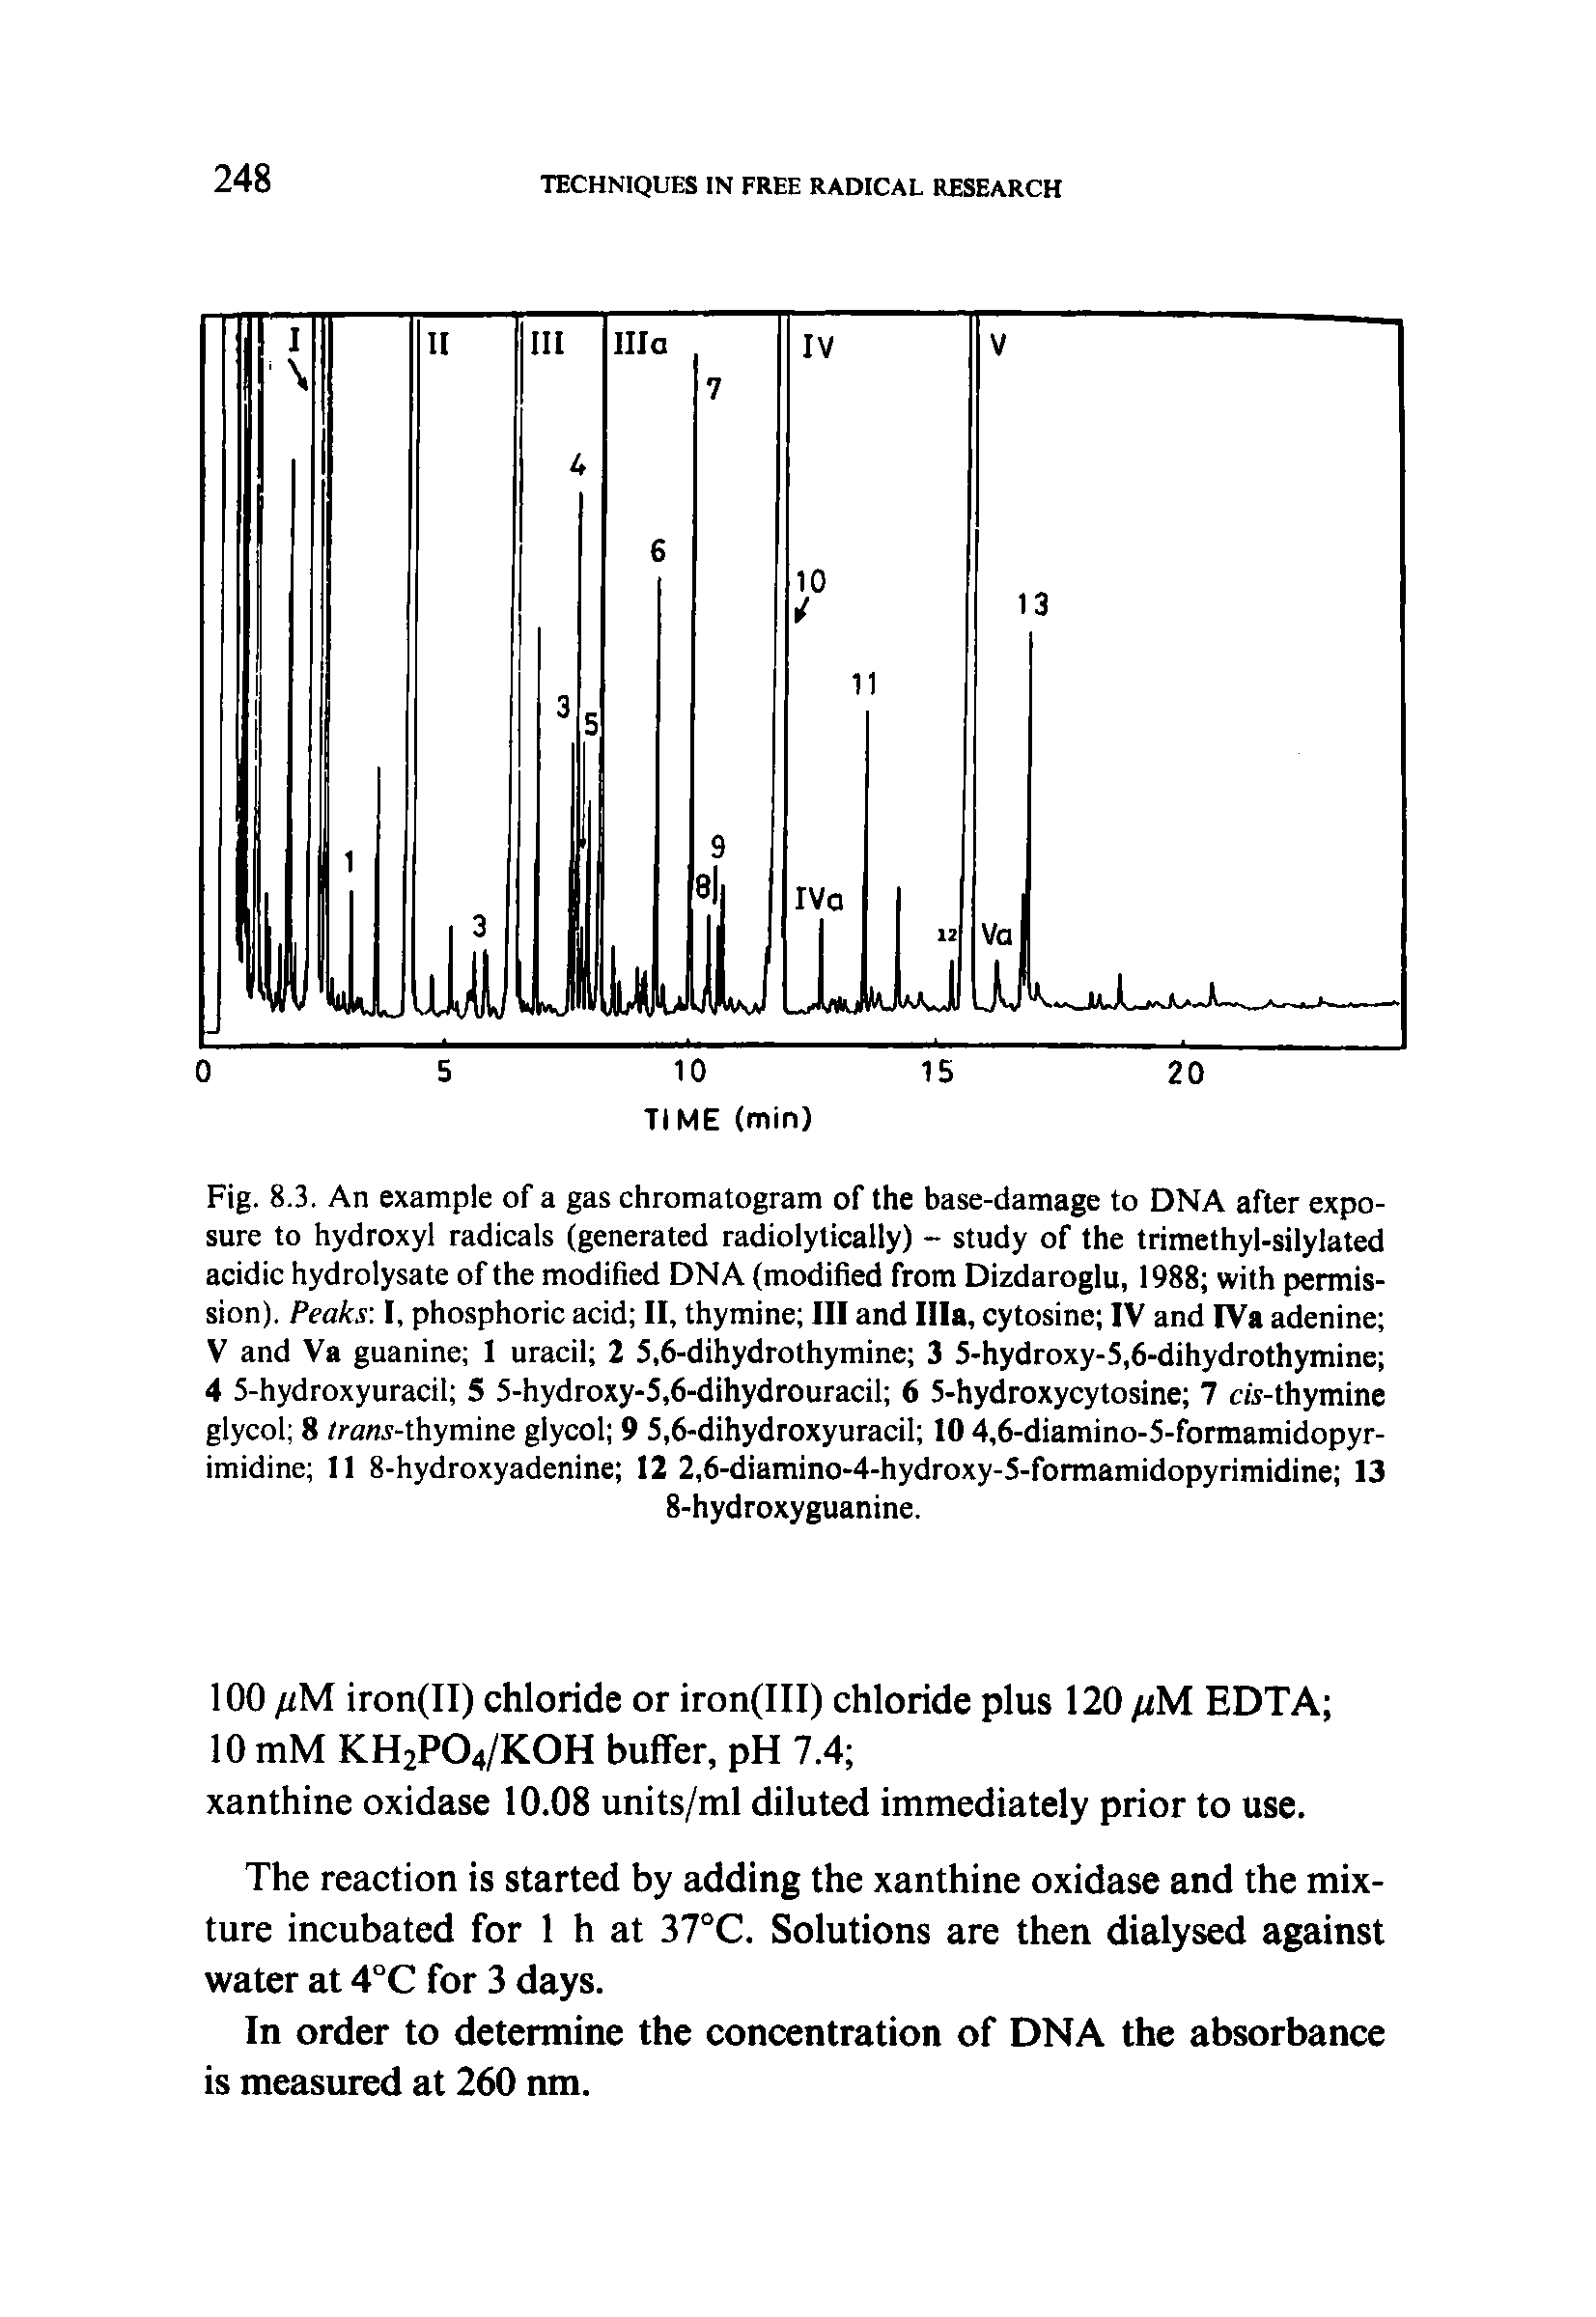 Fig. 8.3. An example of a gas chromatogram of the base-damage to DNA after exposure to hydroxyl radicals (generated radiolytically) - study of the trimethyl-silylated acidic hydrolysate of the modified DNA (modified from Dizdaroglu, 1988 with permission). Peaks I, phosphoric acid II, thymine III and Ilia, cytosine IV and IVa adenine V and Va guanine I uracil 2 5,6-dihydrothymine 3 5-hydroxy-5,6-dihydrothymine 4 5-hydroxyuracil 5 5-hydroxy-5,6-dihydrouracil 6 5-hydroxycytosine 7 cis-thymine glycol 8 /ra .s-thymine glycol 9 5,6-dihydroxyuracil 10 4,6-diamino-5-formamidopyr-imidine 11 8-hydroxyadenine 12 2,6-diamino-4-hydroxy-5-formamidopyrimidine 13...